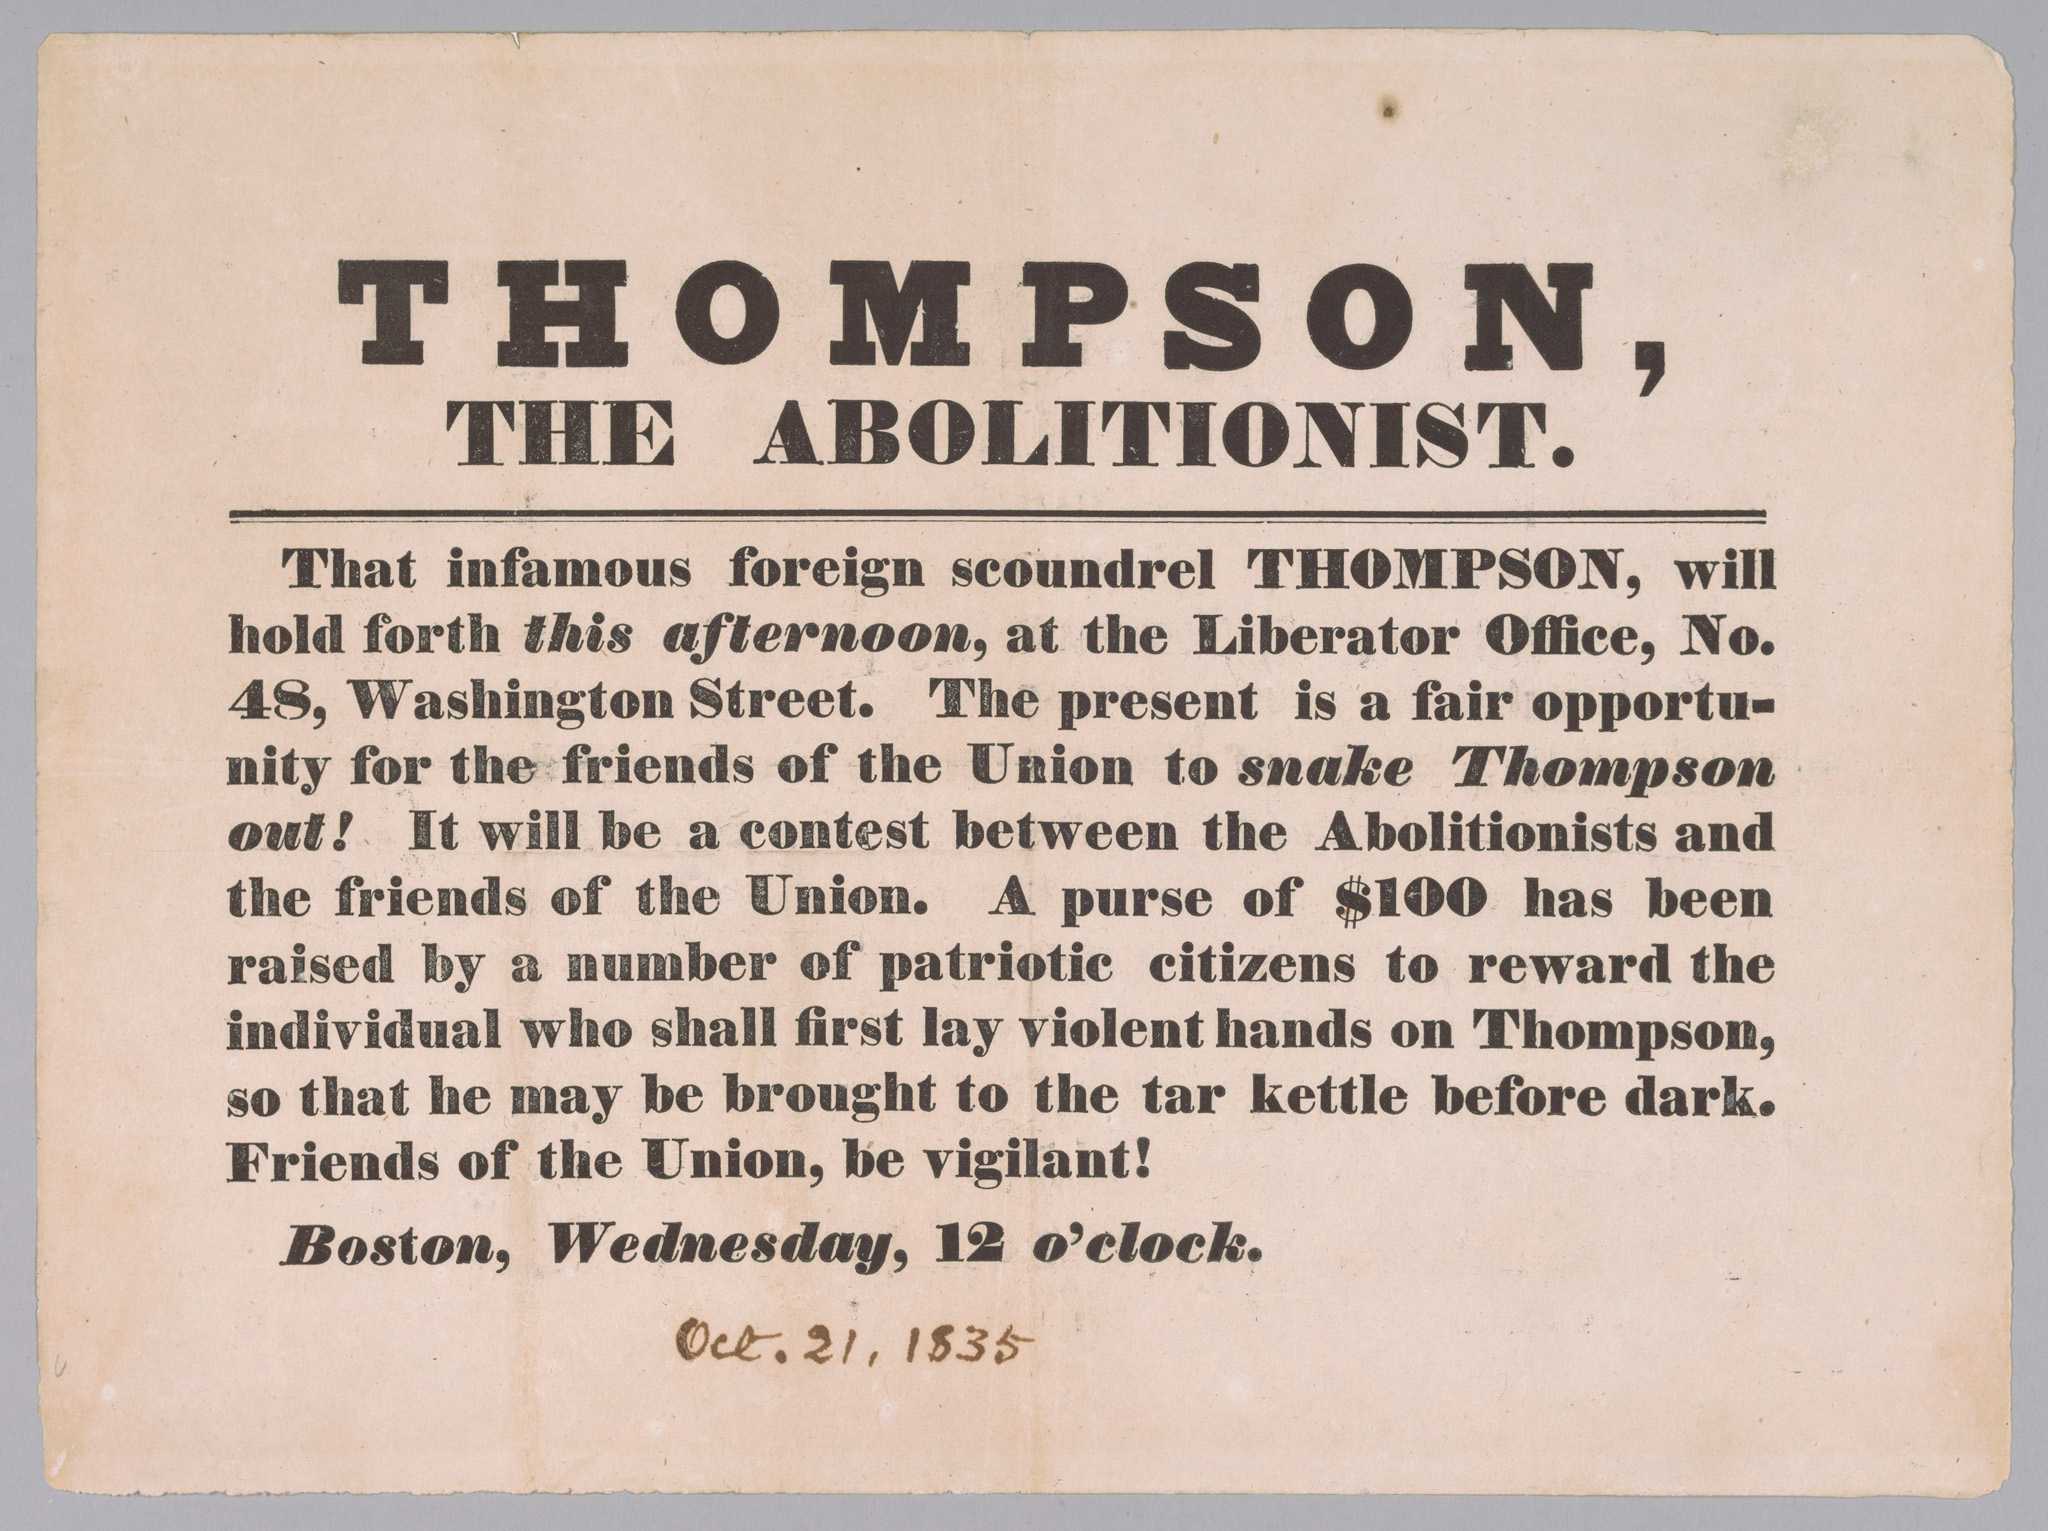 A broadside calling for violence against abolitionist George Thompson. The broadside is printed in black ink on a rectangular piece of off-white paper. At top, in large letters are the words [THOMPSON, / THE ABOLITIONIST].  This is underlined by a thick black line. Below the line are the words [That infamous foreign scoundrel THOMPSON, will / hold forth this afternoon, at the Liberator Office, No. / 48, Washington Street. The present is a fair opportu- / nity for the friends of the Union to snake Thompson / out!  It will be a contest between the Abolitionists and / the friends of the Union. A  purse of $100 has been / raised by a number of patriotic citizens to reward the / individual who shall first lay violent hands on Thompson, / so that he may be brought to the tar kettle before dark. / Friends of the Union, be vigilant!/ Boston, Wednesday, 12 o'clock.]. Below this is handwritten [Oct. 21, 1835] in black ink.